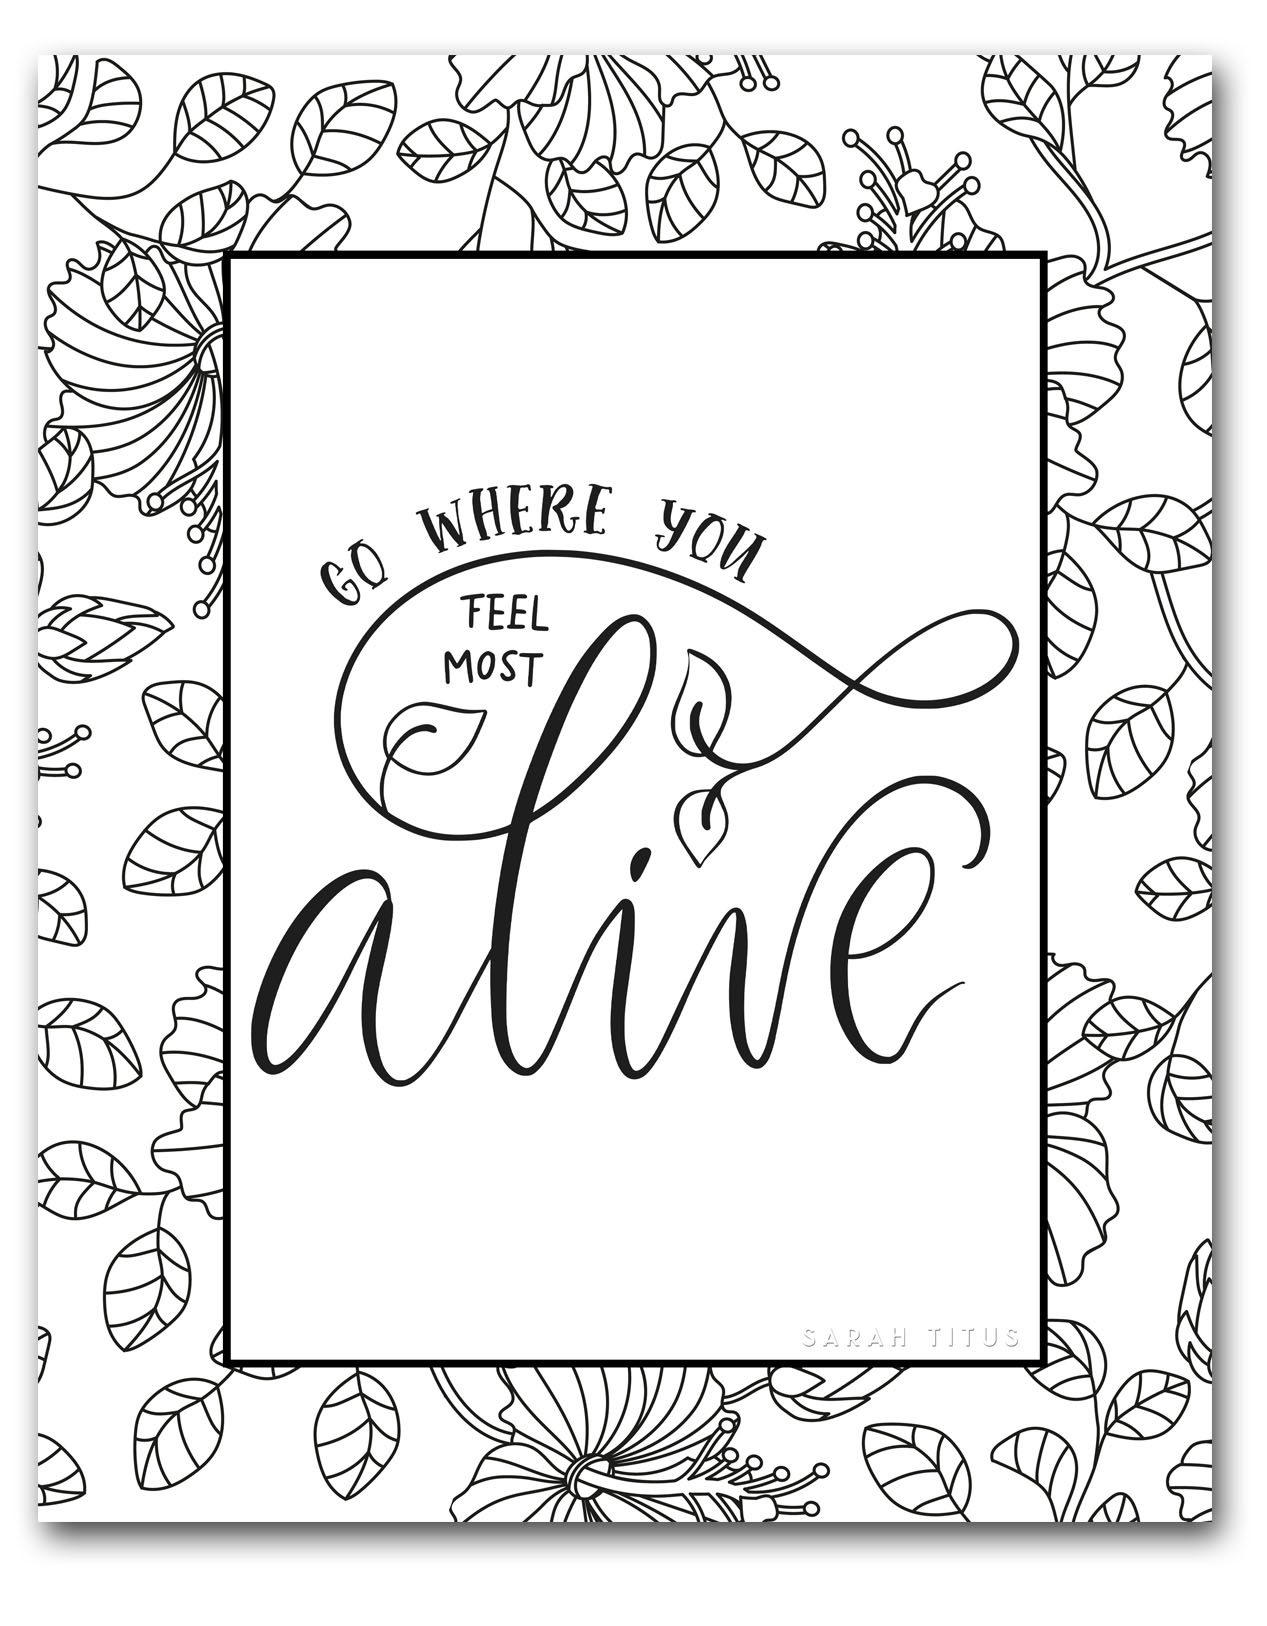 If you need stress relief and optimism, these free online coloring sheets to encourage you are a must! #onlinecoloring #coloringpageforadults #freeprintable